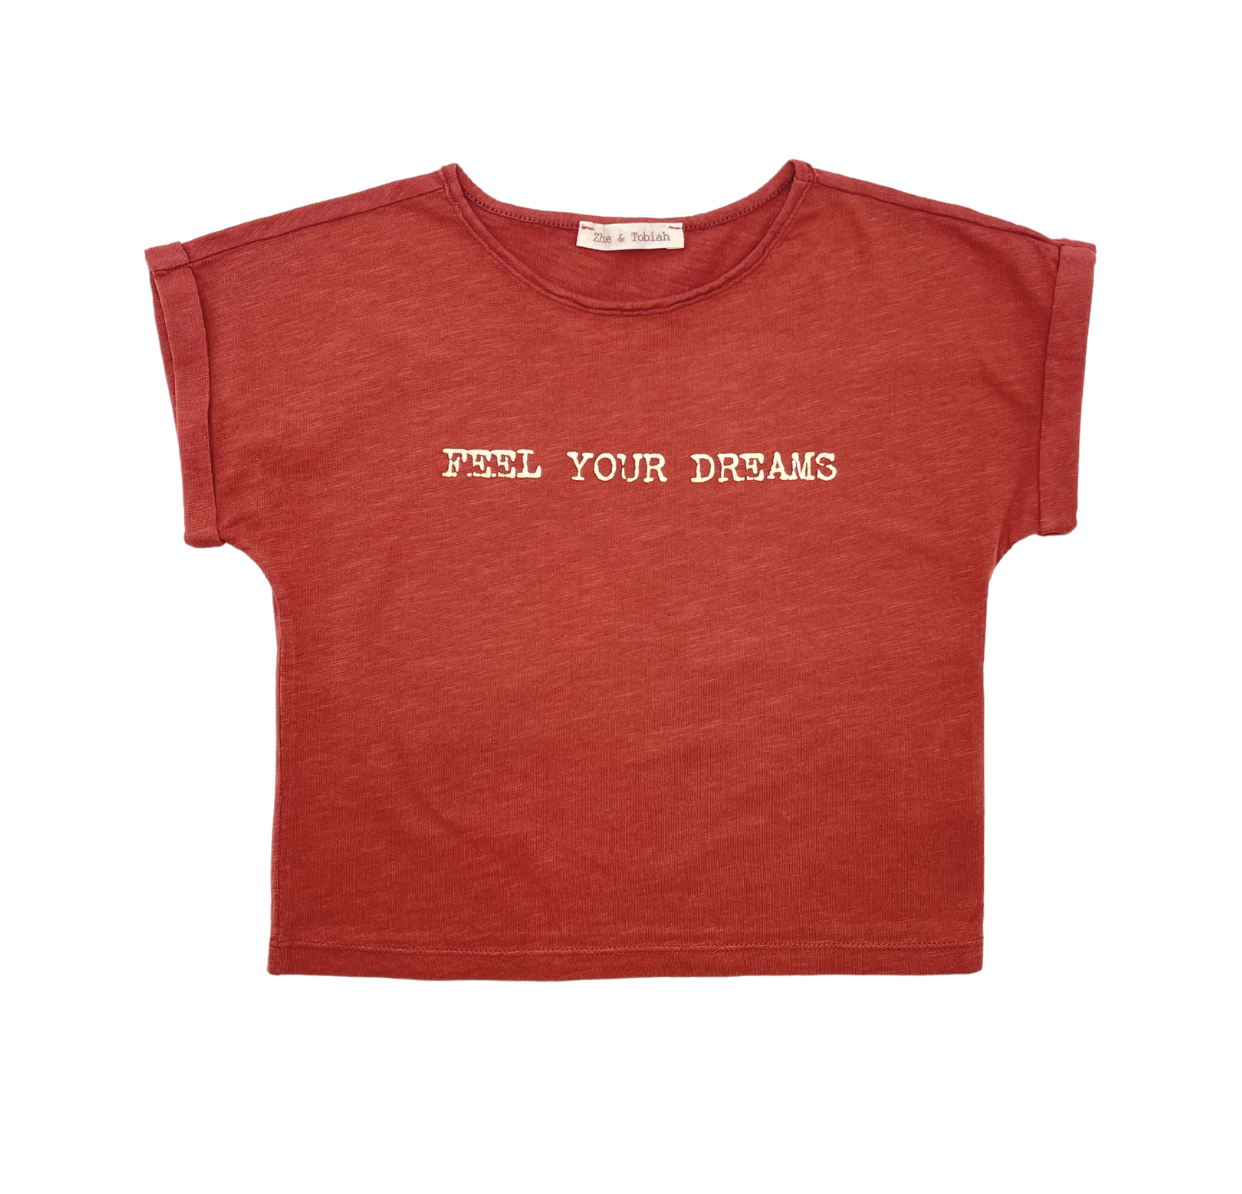 ZHOE &amp; TOBIAH - "Feel your dreams" T-shirt - 2 years old